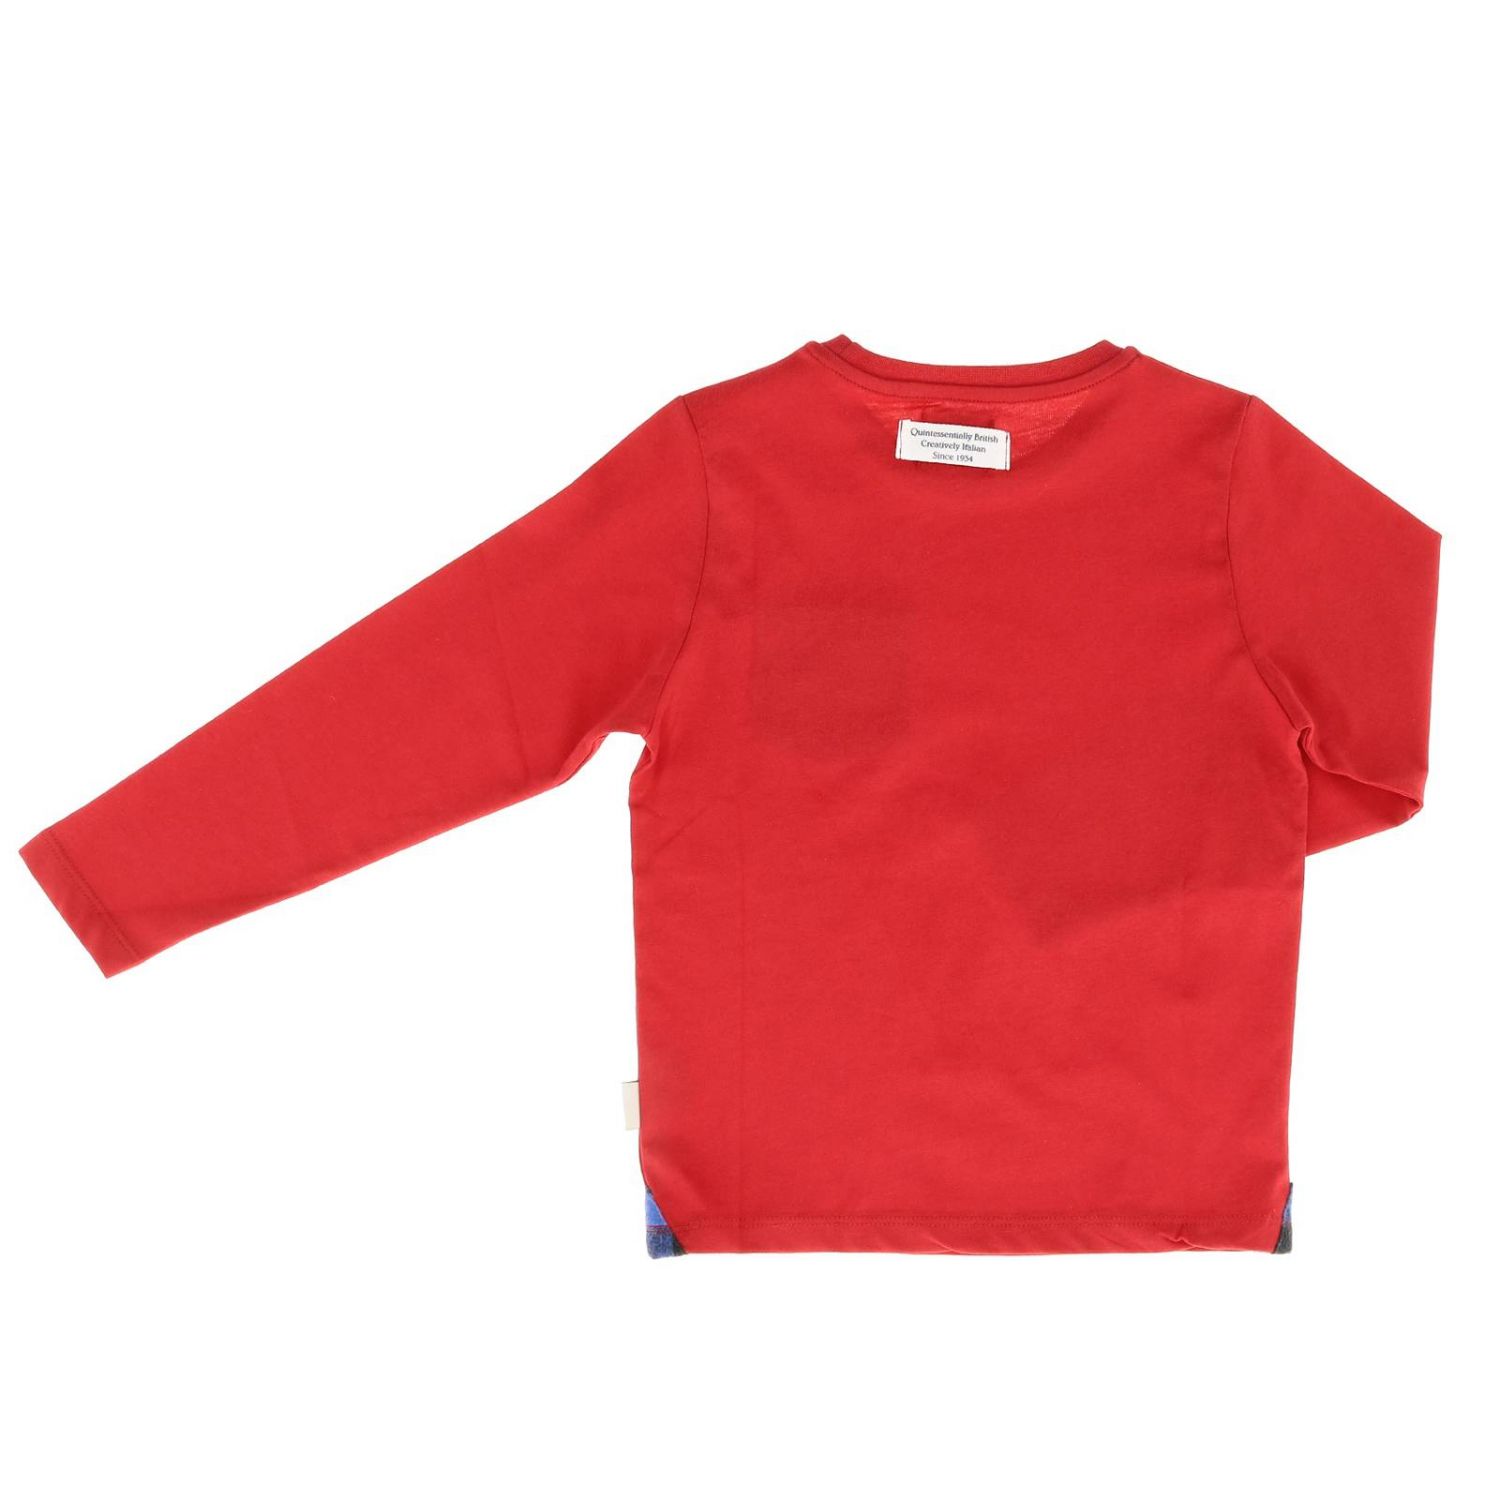 Henry Cotton's Outlet: T-shirt kids - Red | T-Shirt Henry Cotton's ...